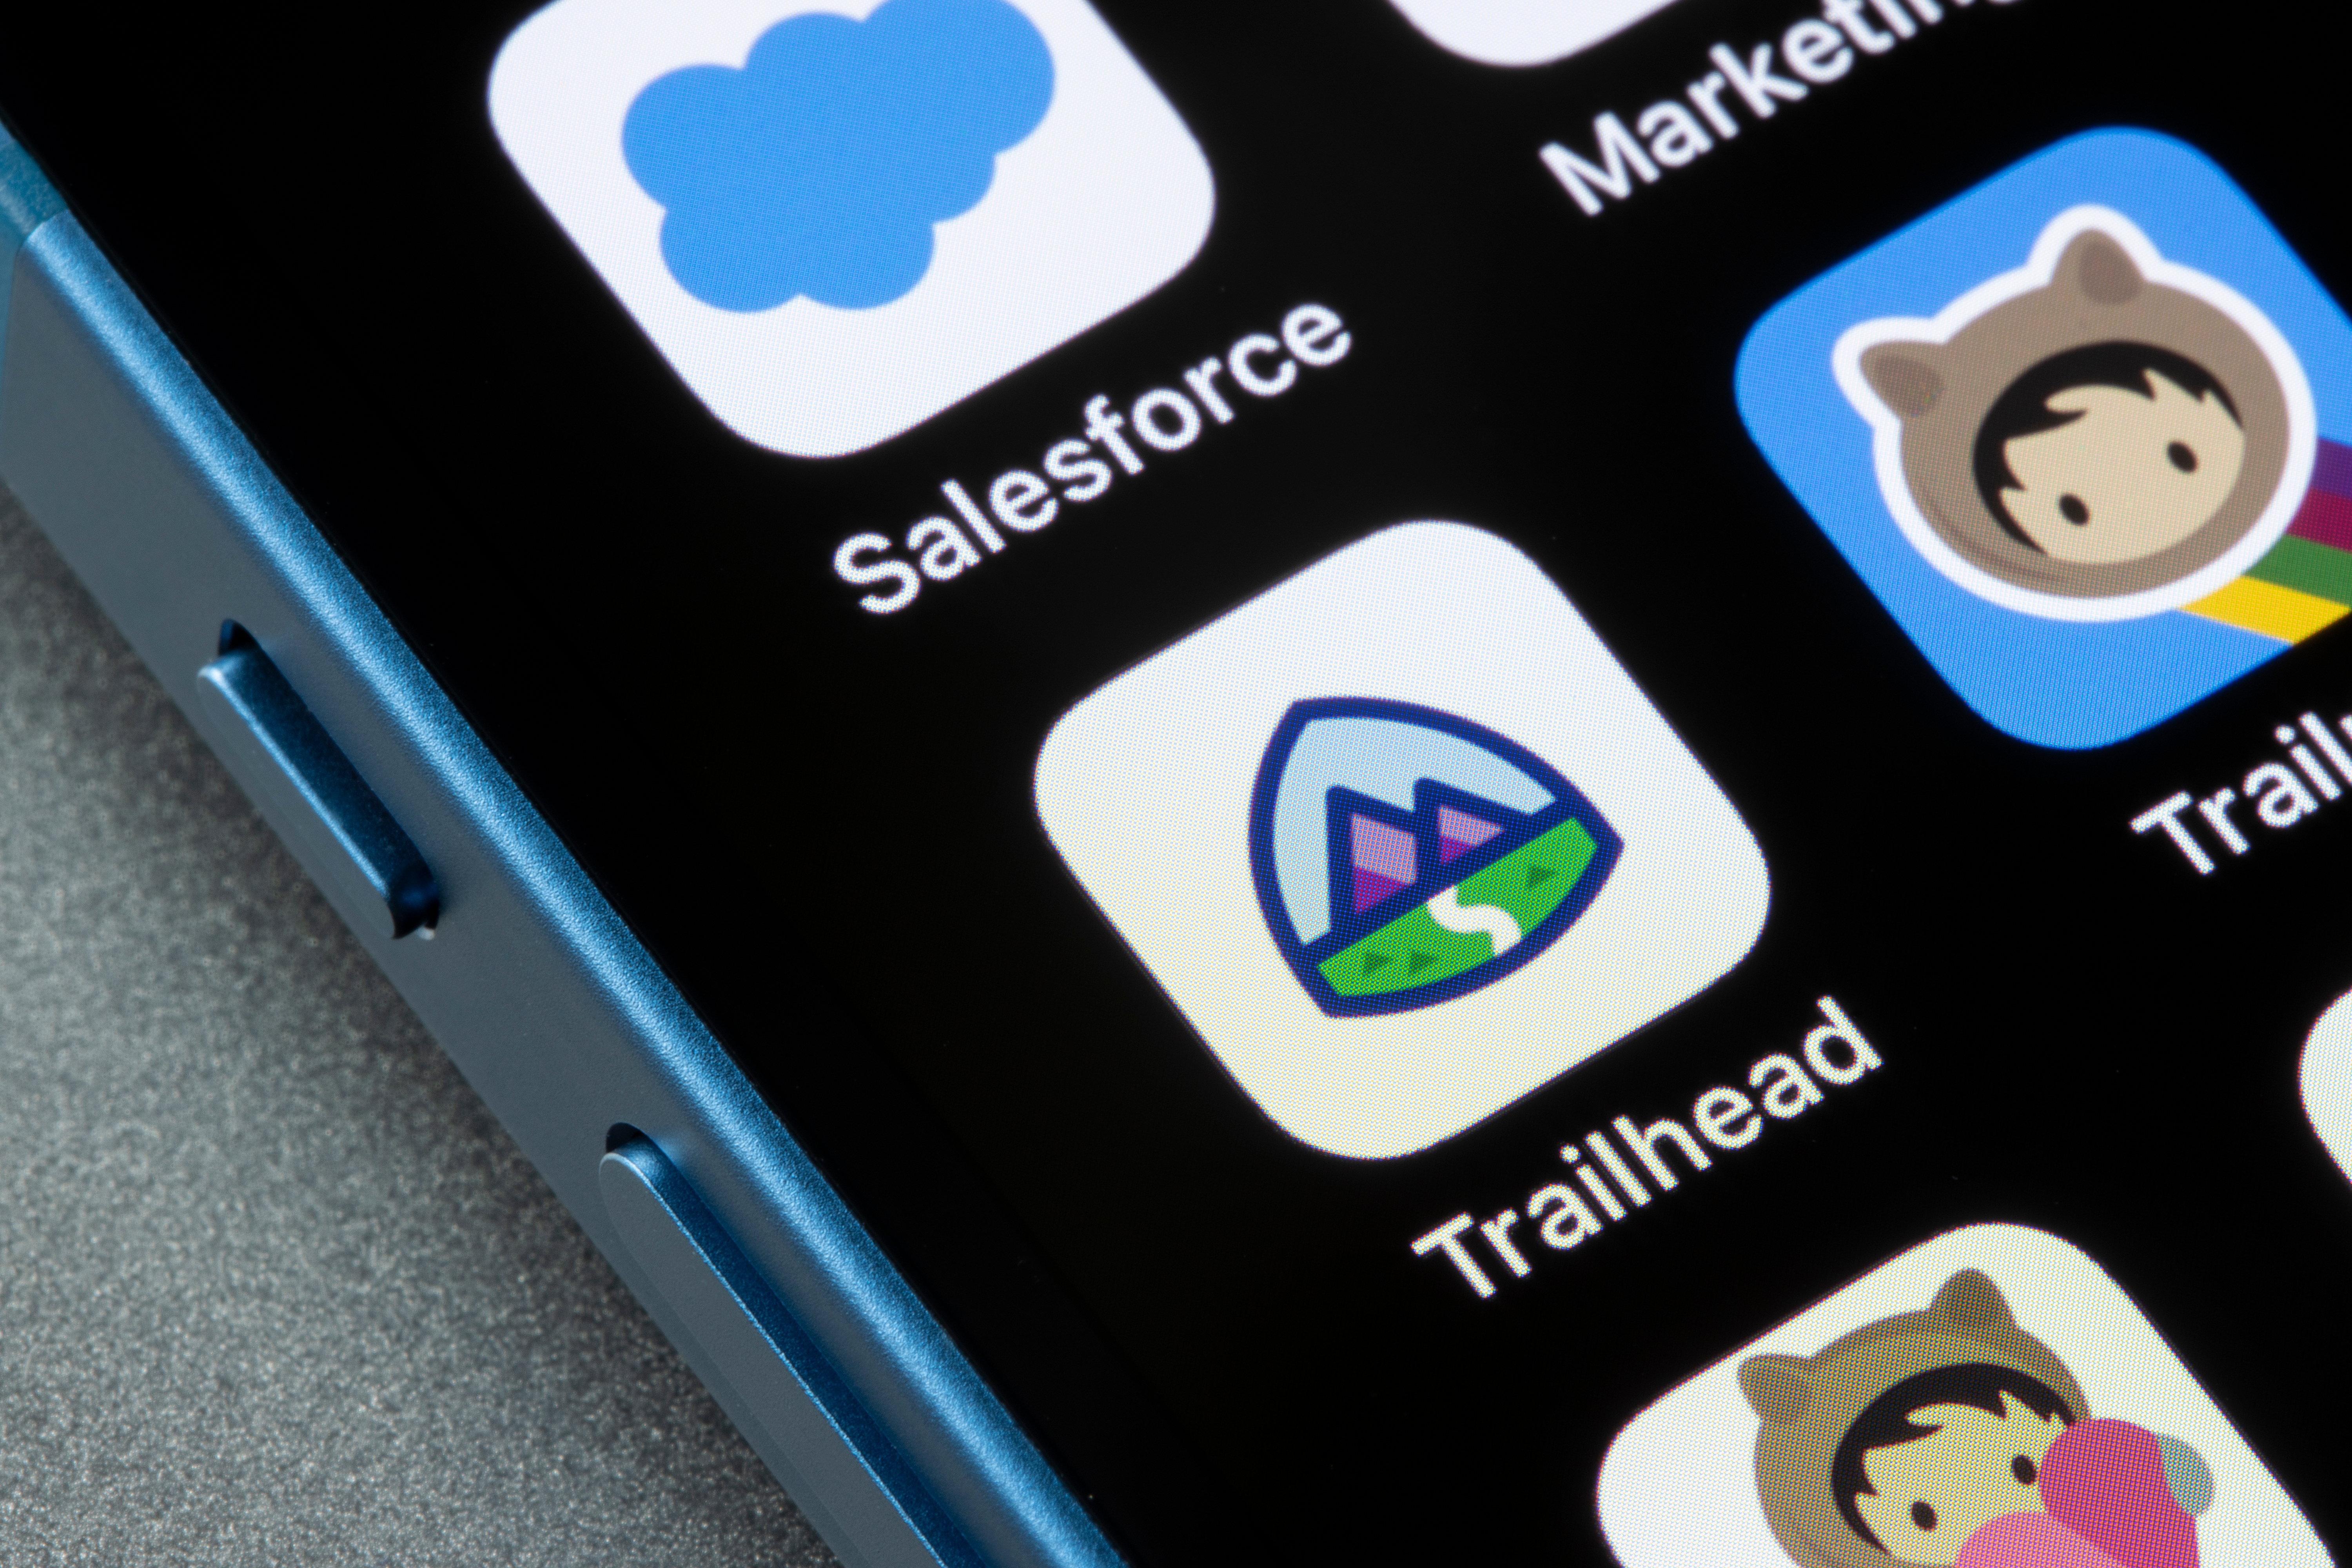 Salesforce apps on mobile phone screen